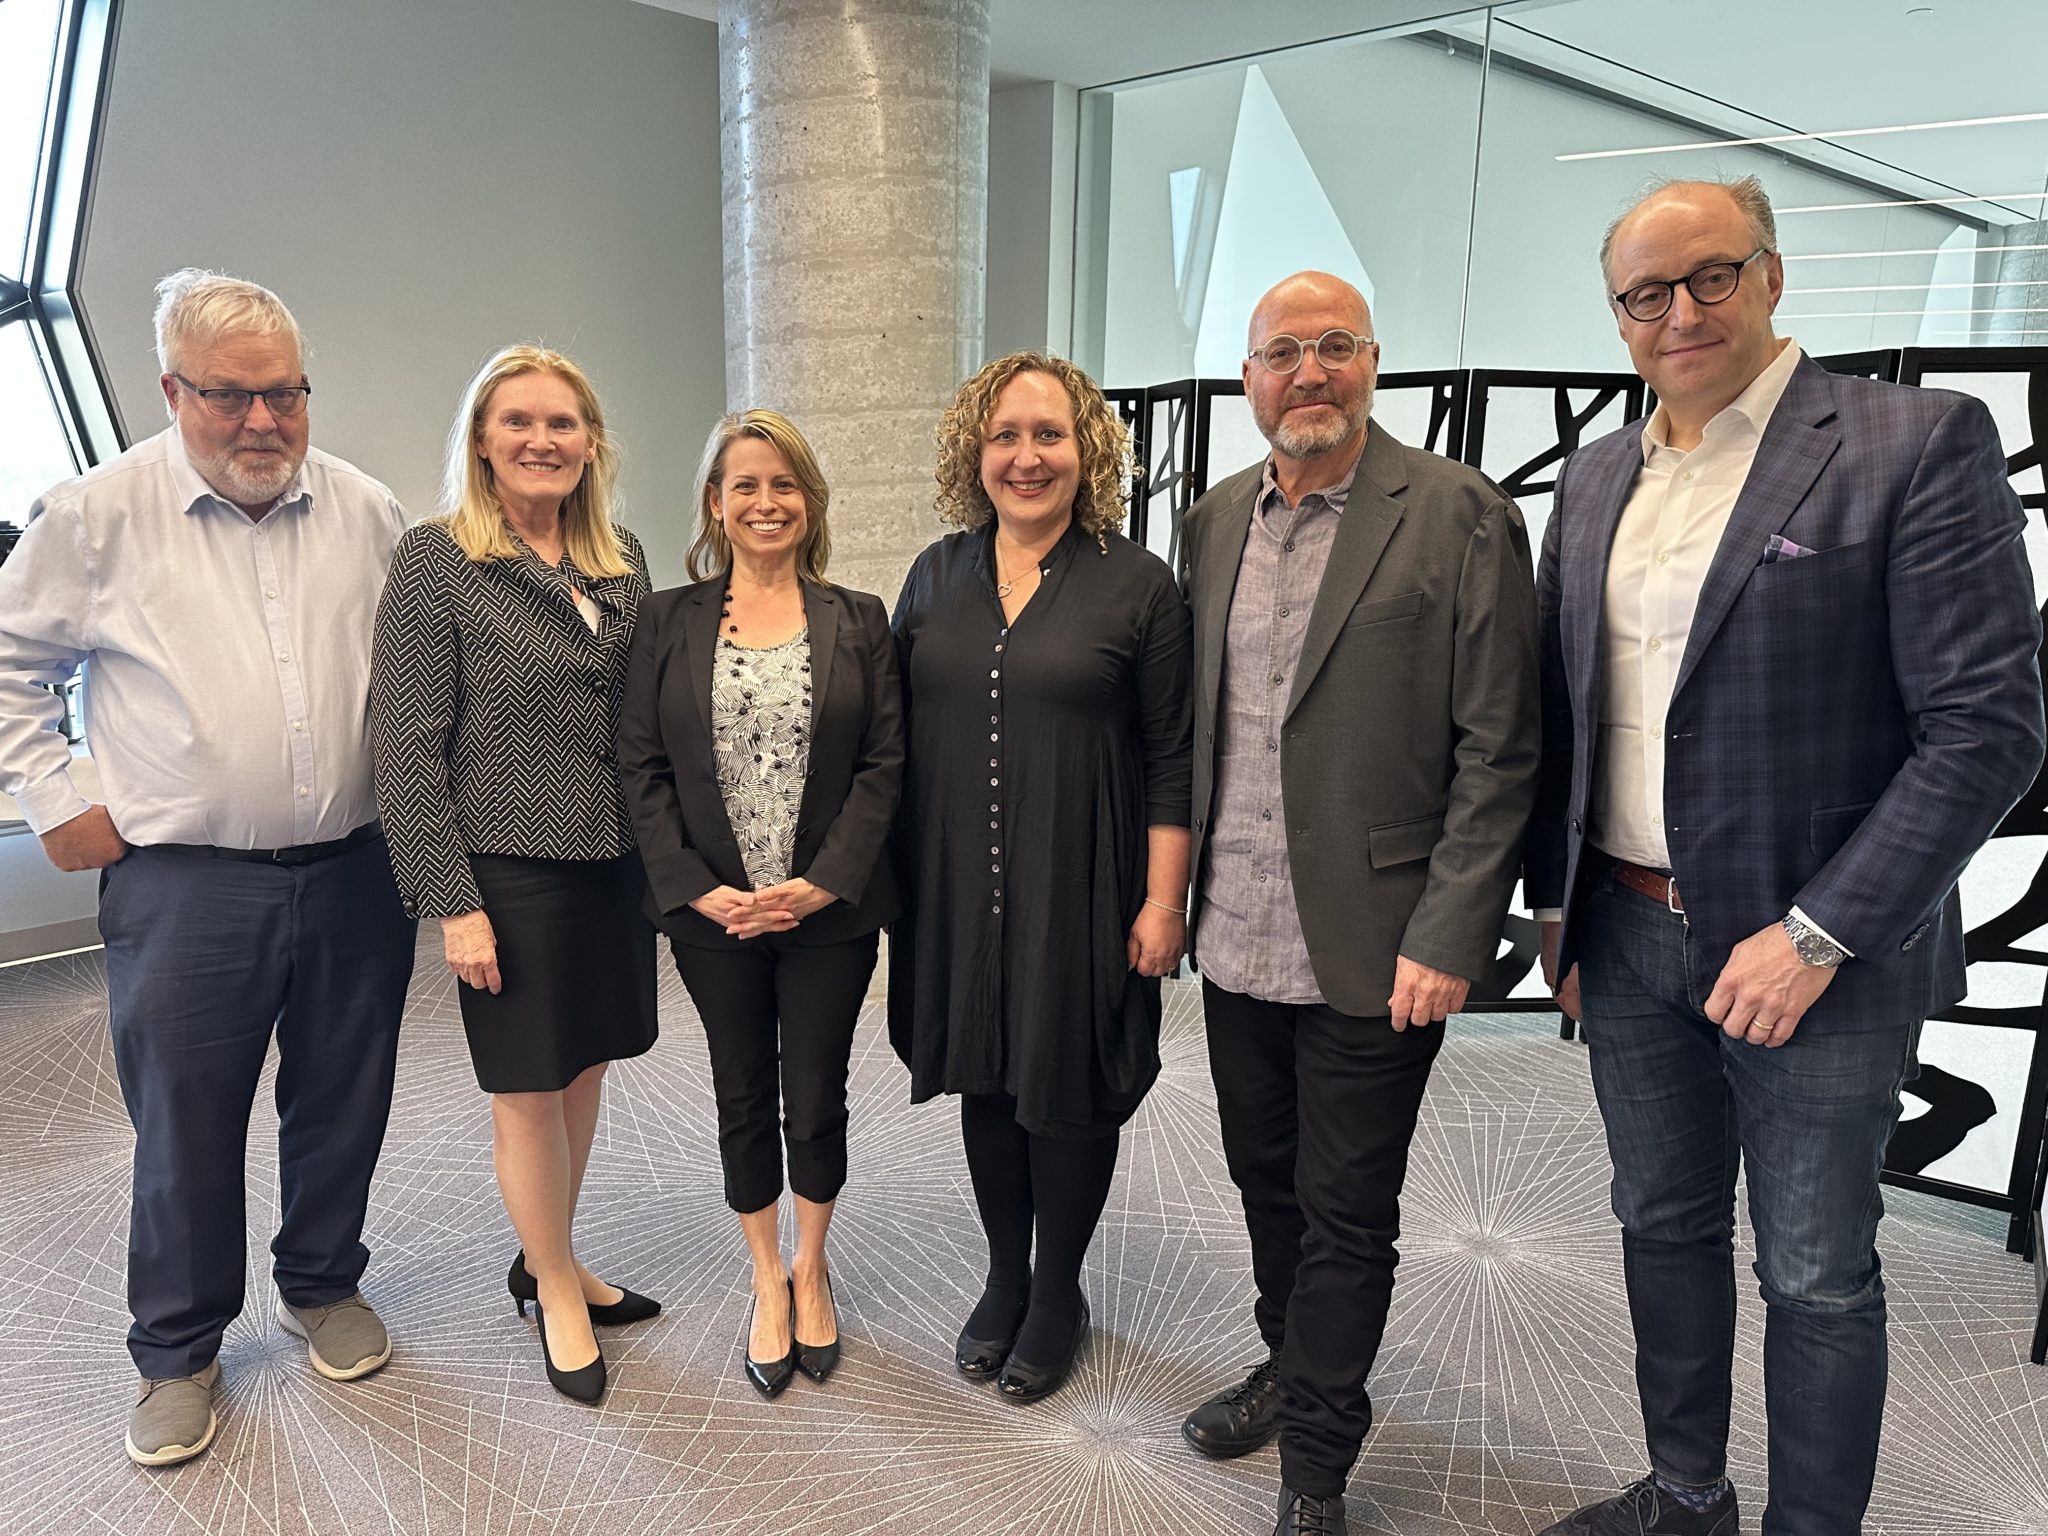 (from left to right): York University’s Prof. Andrew Maxwell and President Rhonda Lenton with Jennifer Singer (Director, Major Gifts,Technion Canada), Elysa Greisman (National Executive Director, Technion Canada), Prof. Ezri Tarazi (Technion), and Edward Nagel (Co-President, Technion Canada)